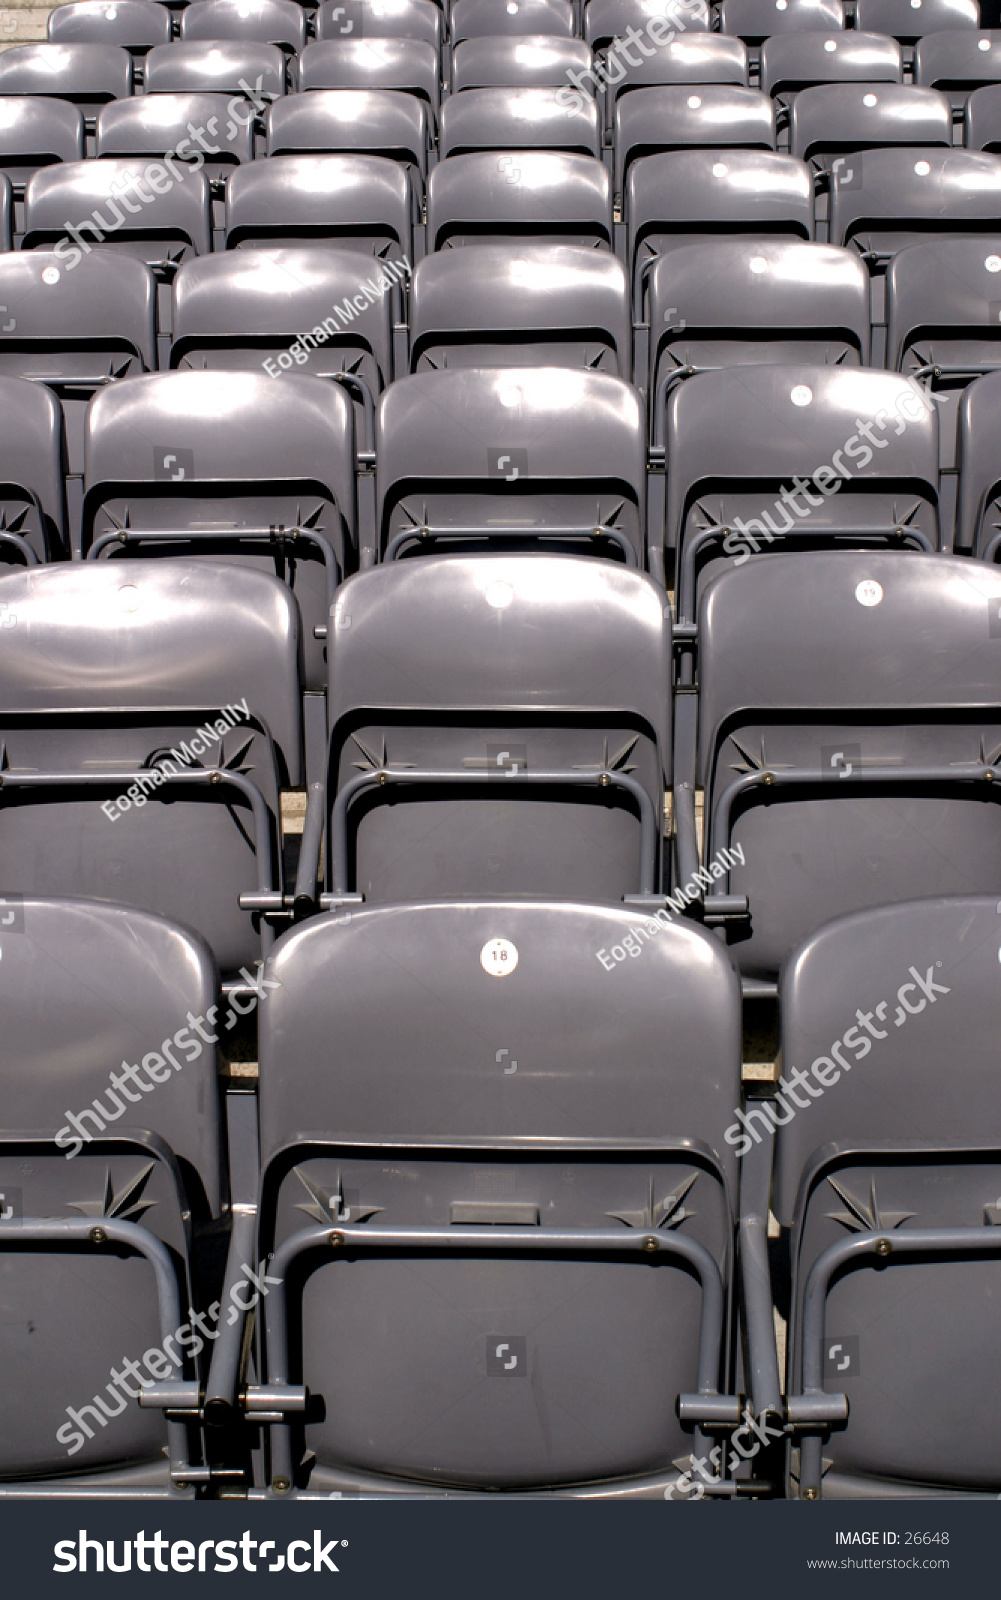 What Seats are Covered in Croke Park 